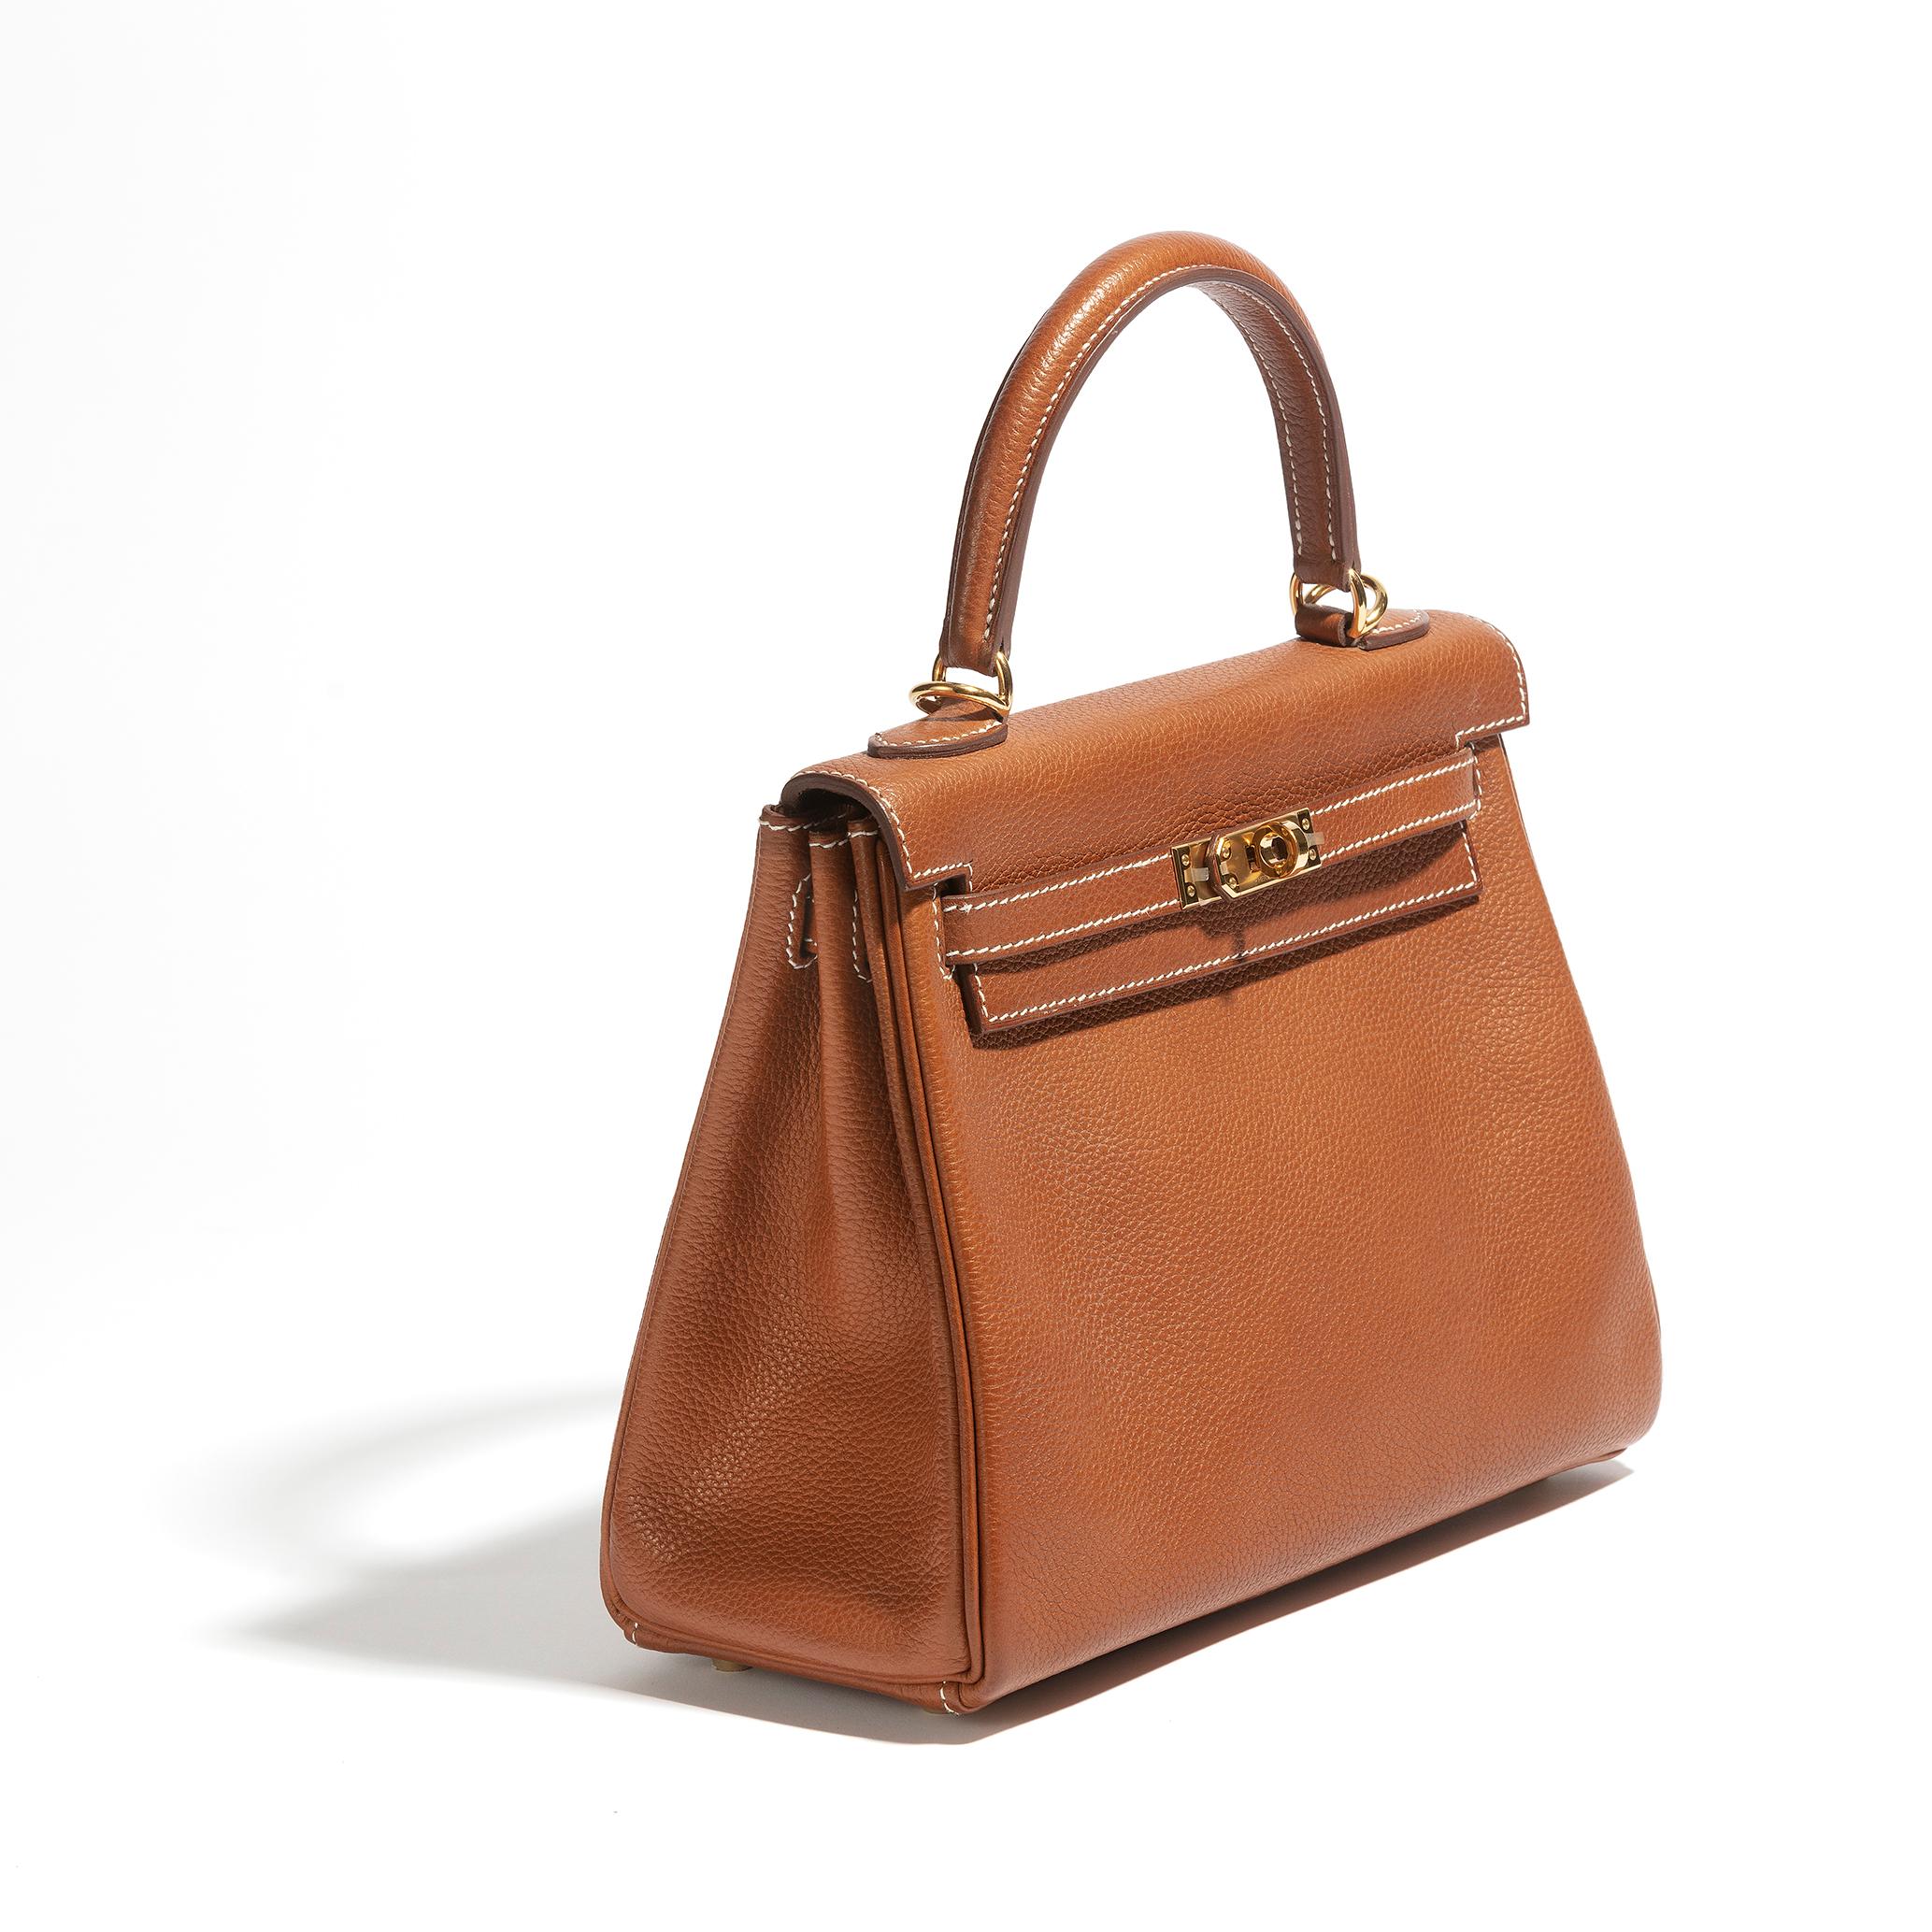 A stunning and rare collector's item, this is a 25cm retourne kelly in barenia faubourg, one of Hermès' most luxurious leather. A buttery tan hue, the fauve colour is particularly beautiful with the gold hardware, still with plastic protectors. The